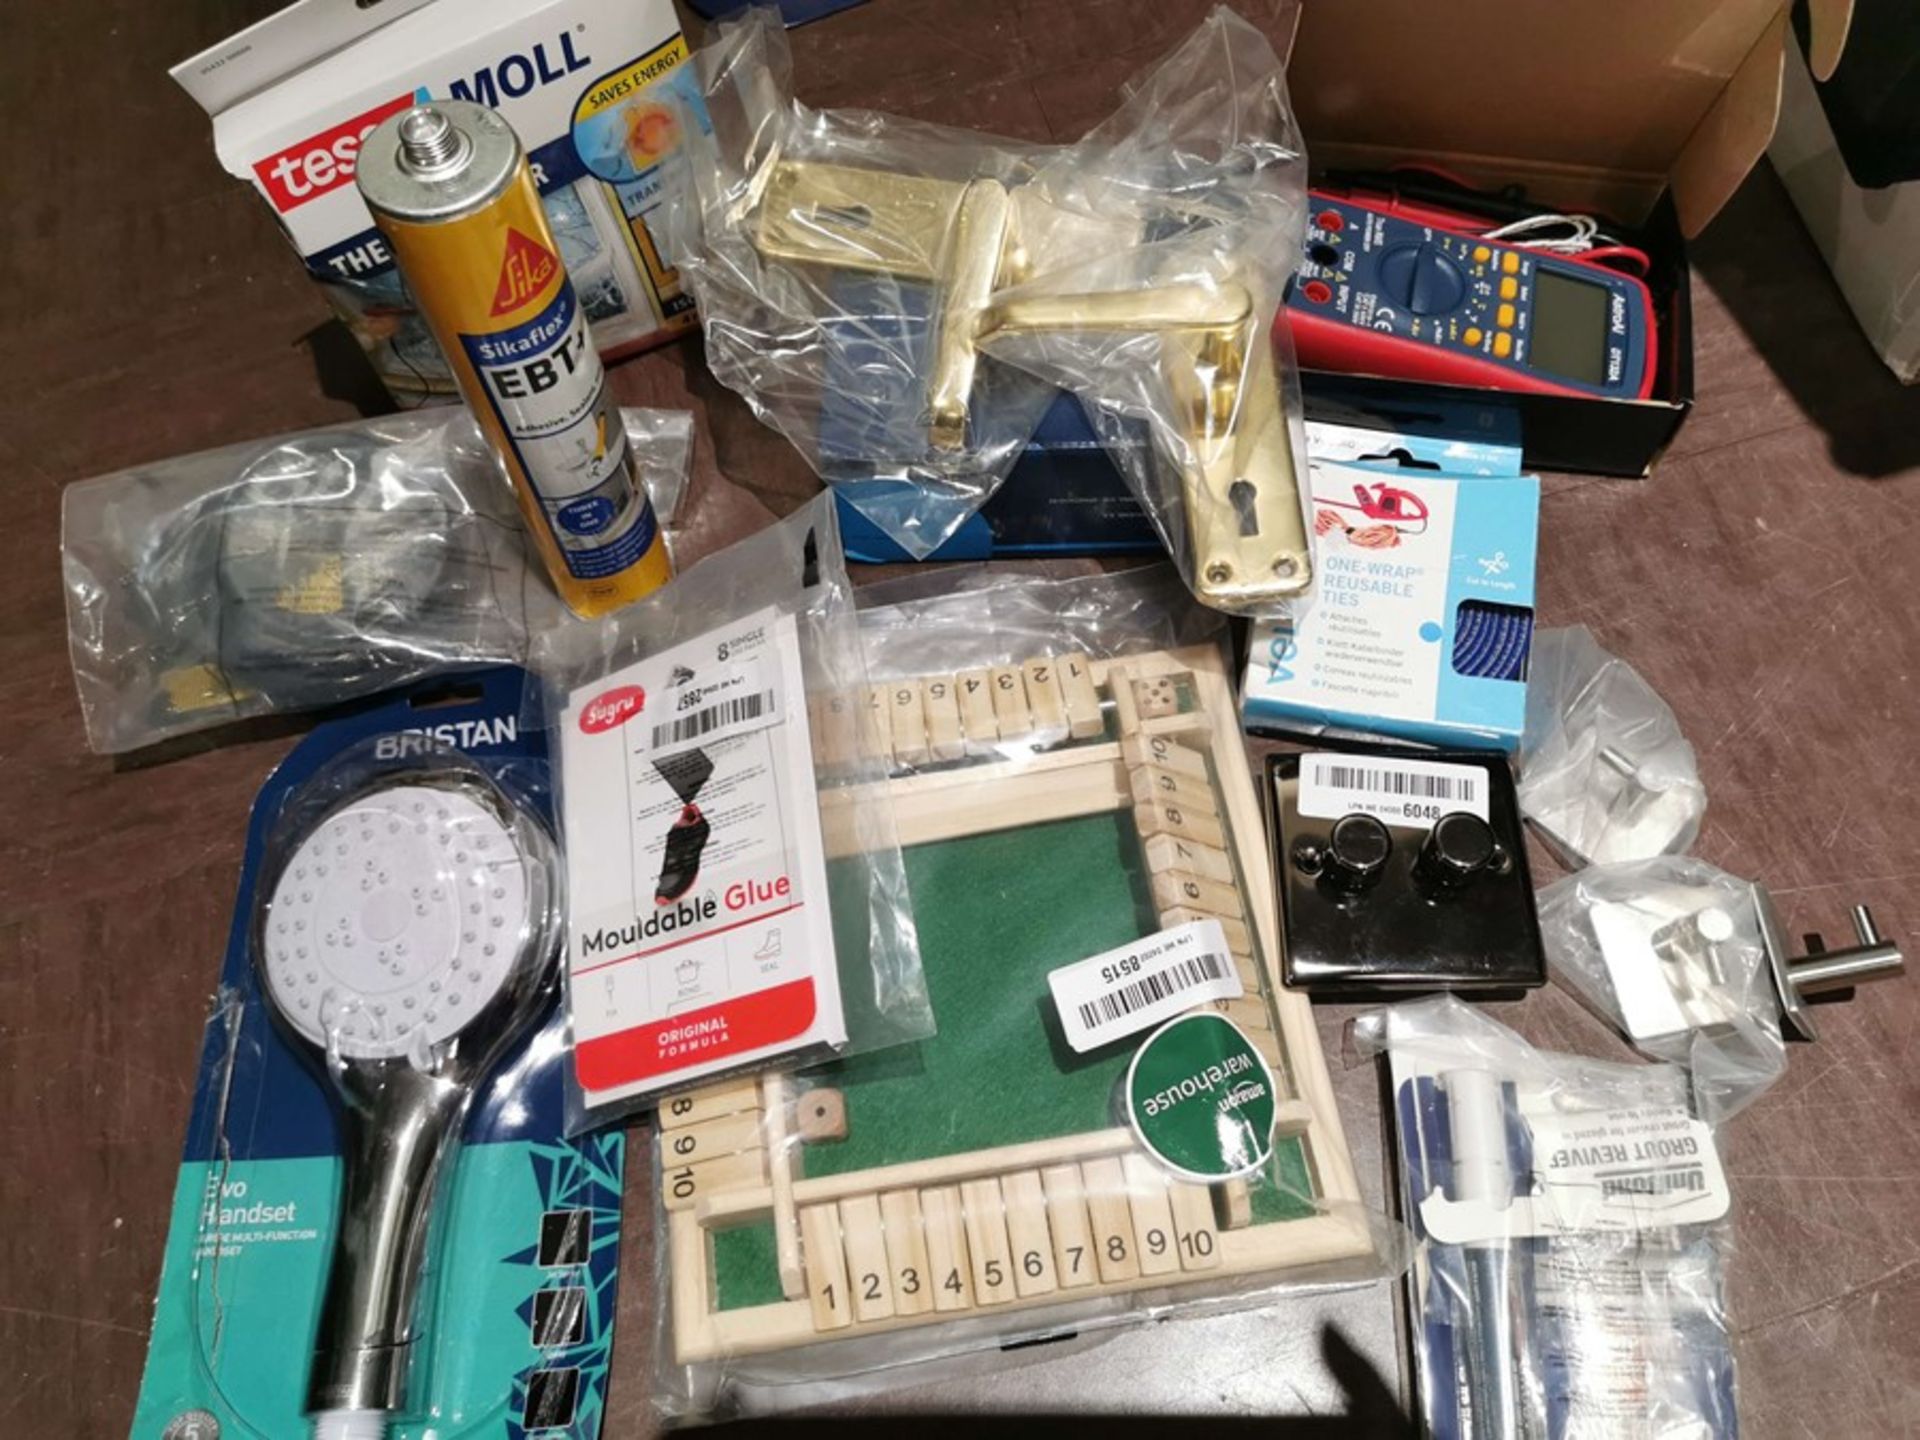 COMBINED RRP £126.00 LOT TO CONTAIN 12 ASSORTED Home Improvement: Bristan, AstroAI, tesamoll, S